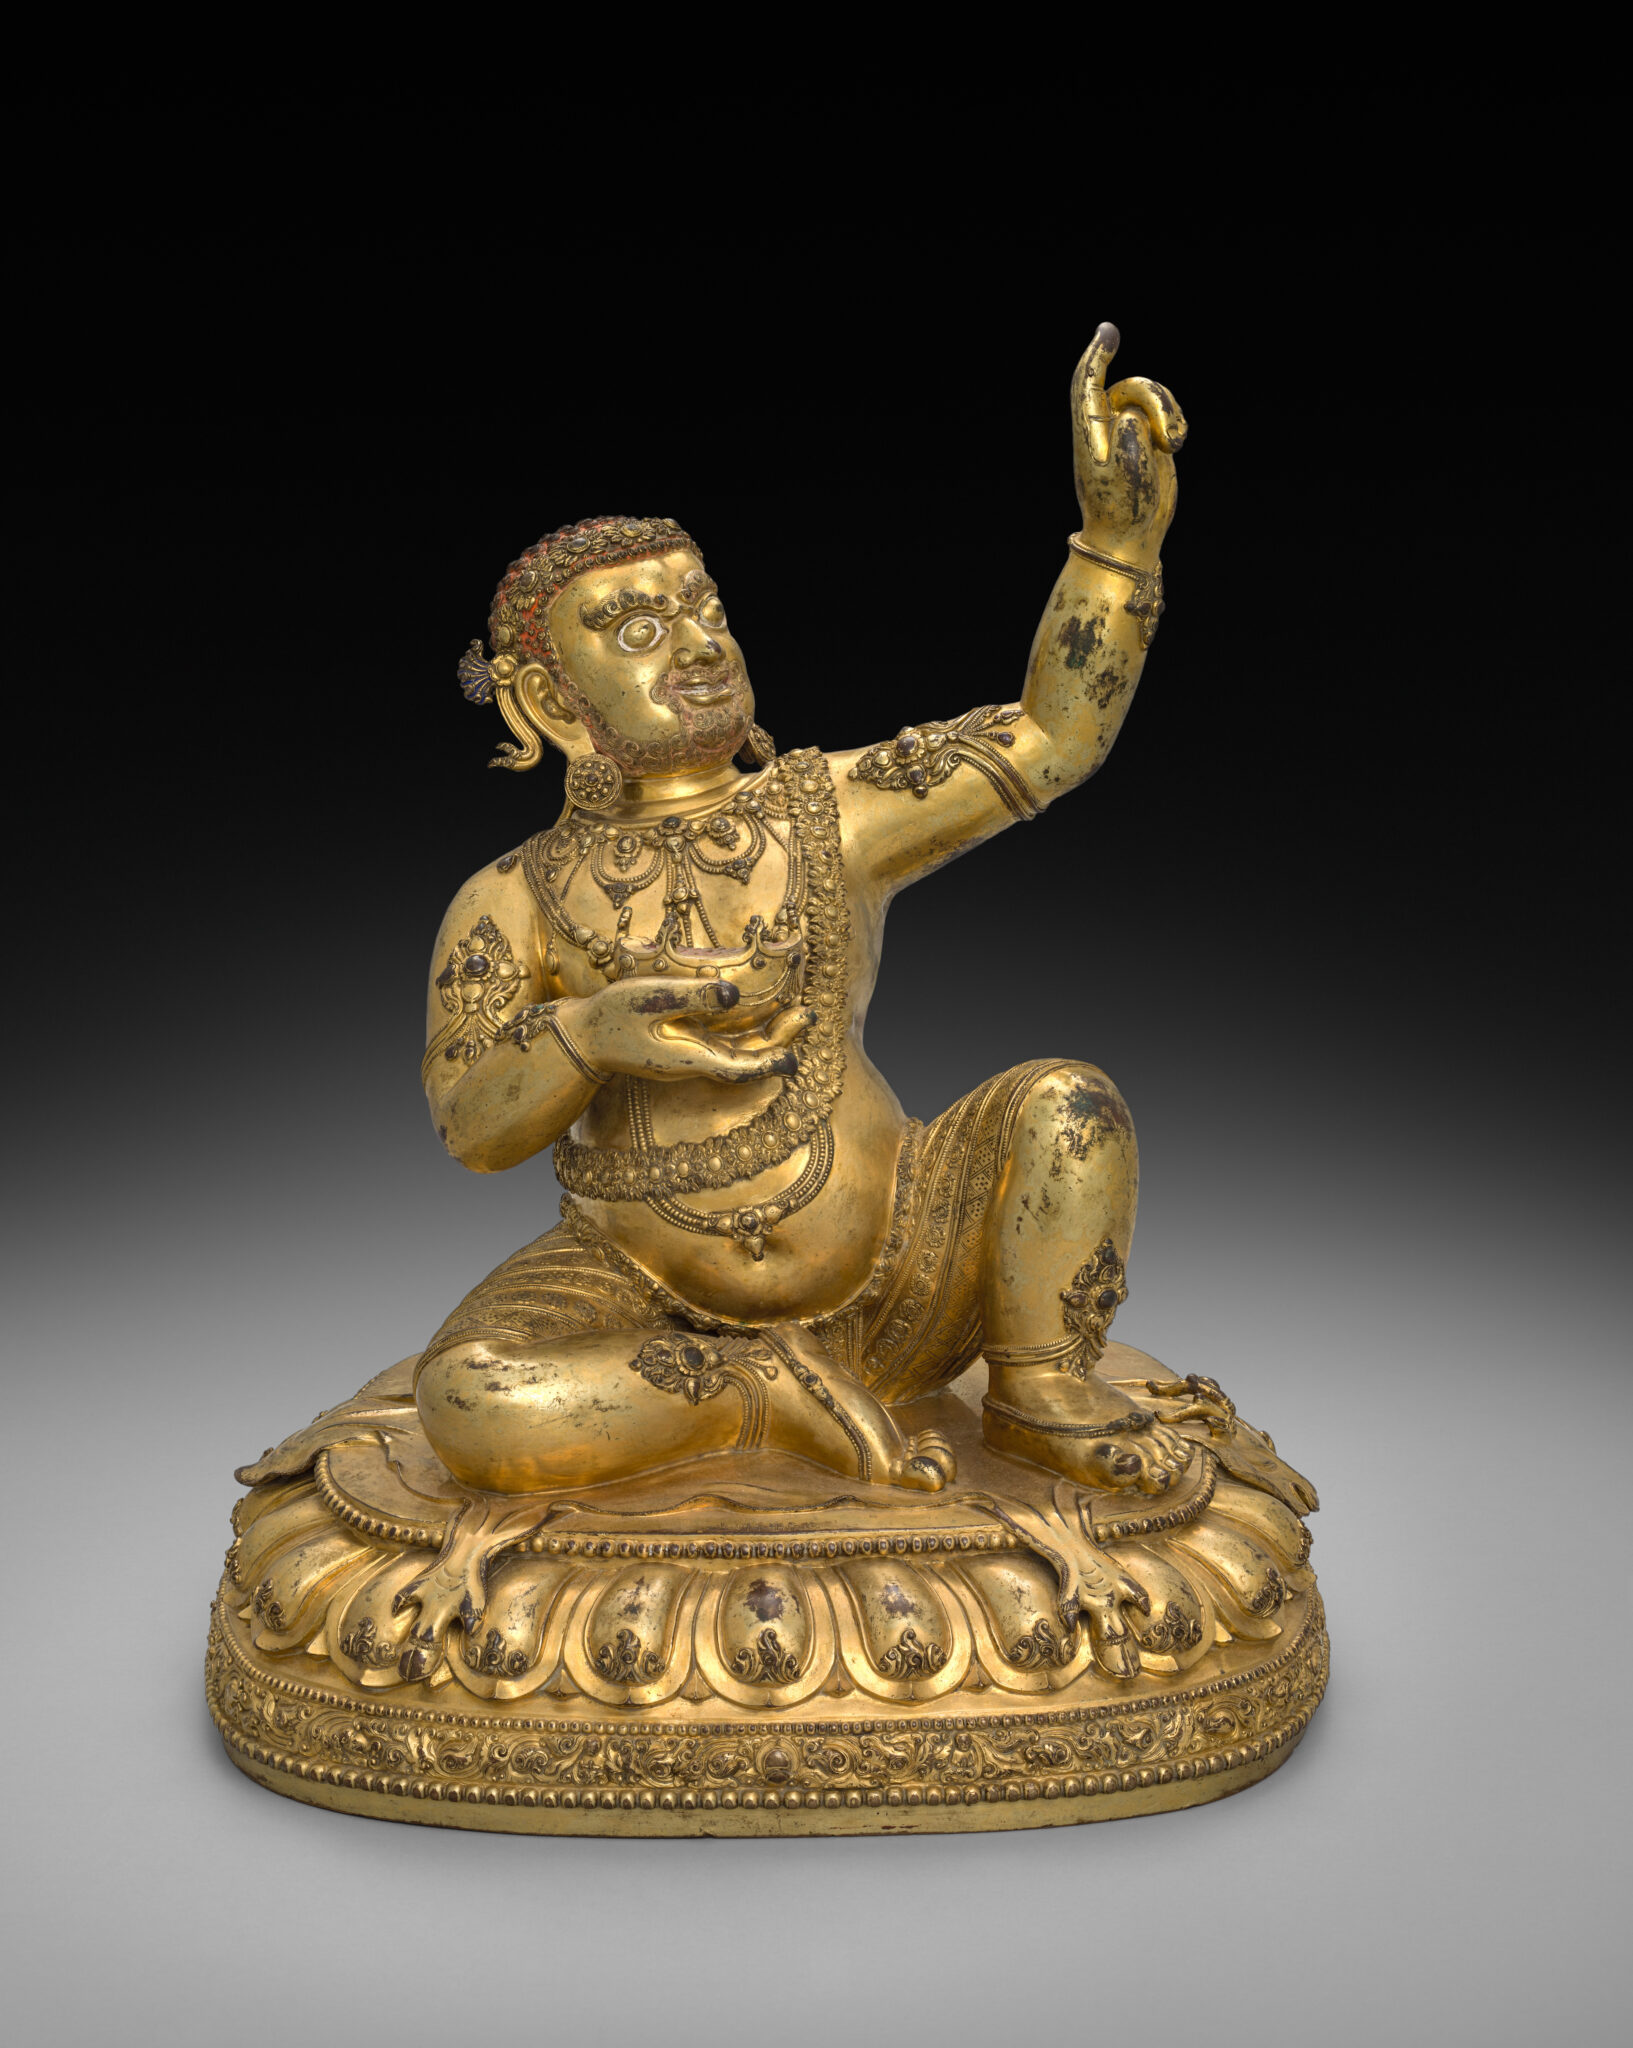 Gilded statuette of figure wearing dhoti seated on lotus pedestal with right arm and knee raised